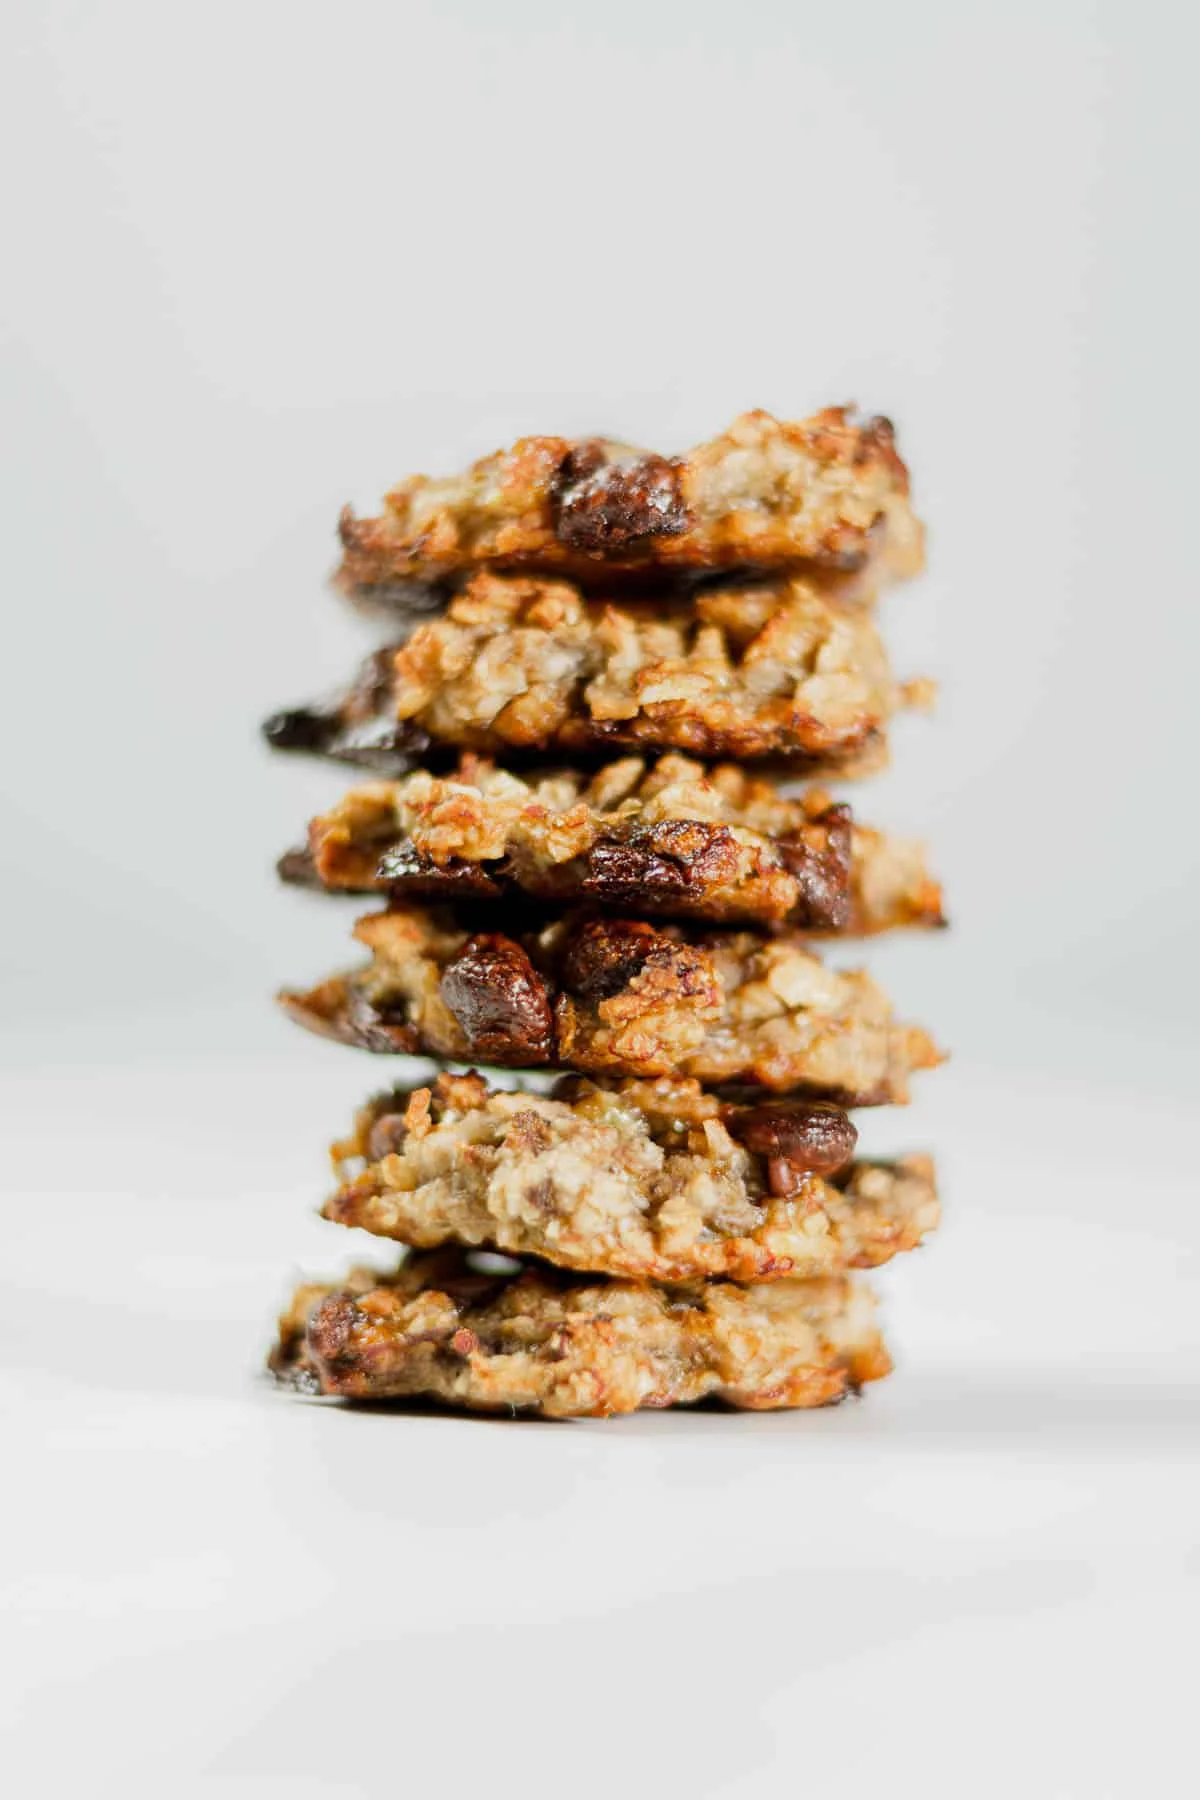 【Only 3 ingredients】 Banana Oatmeal Cookies